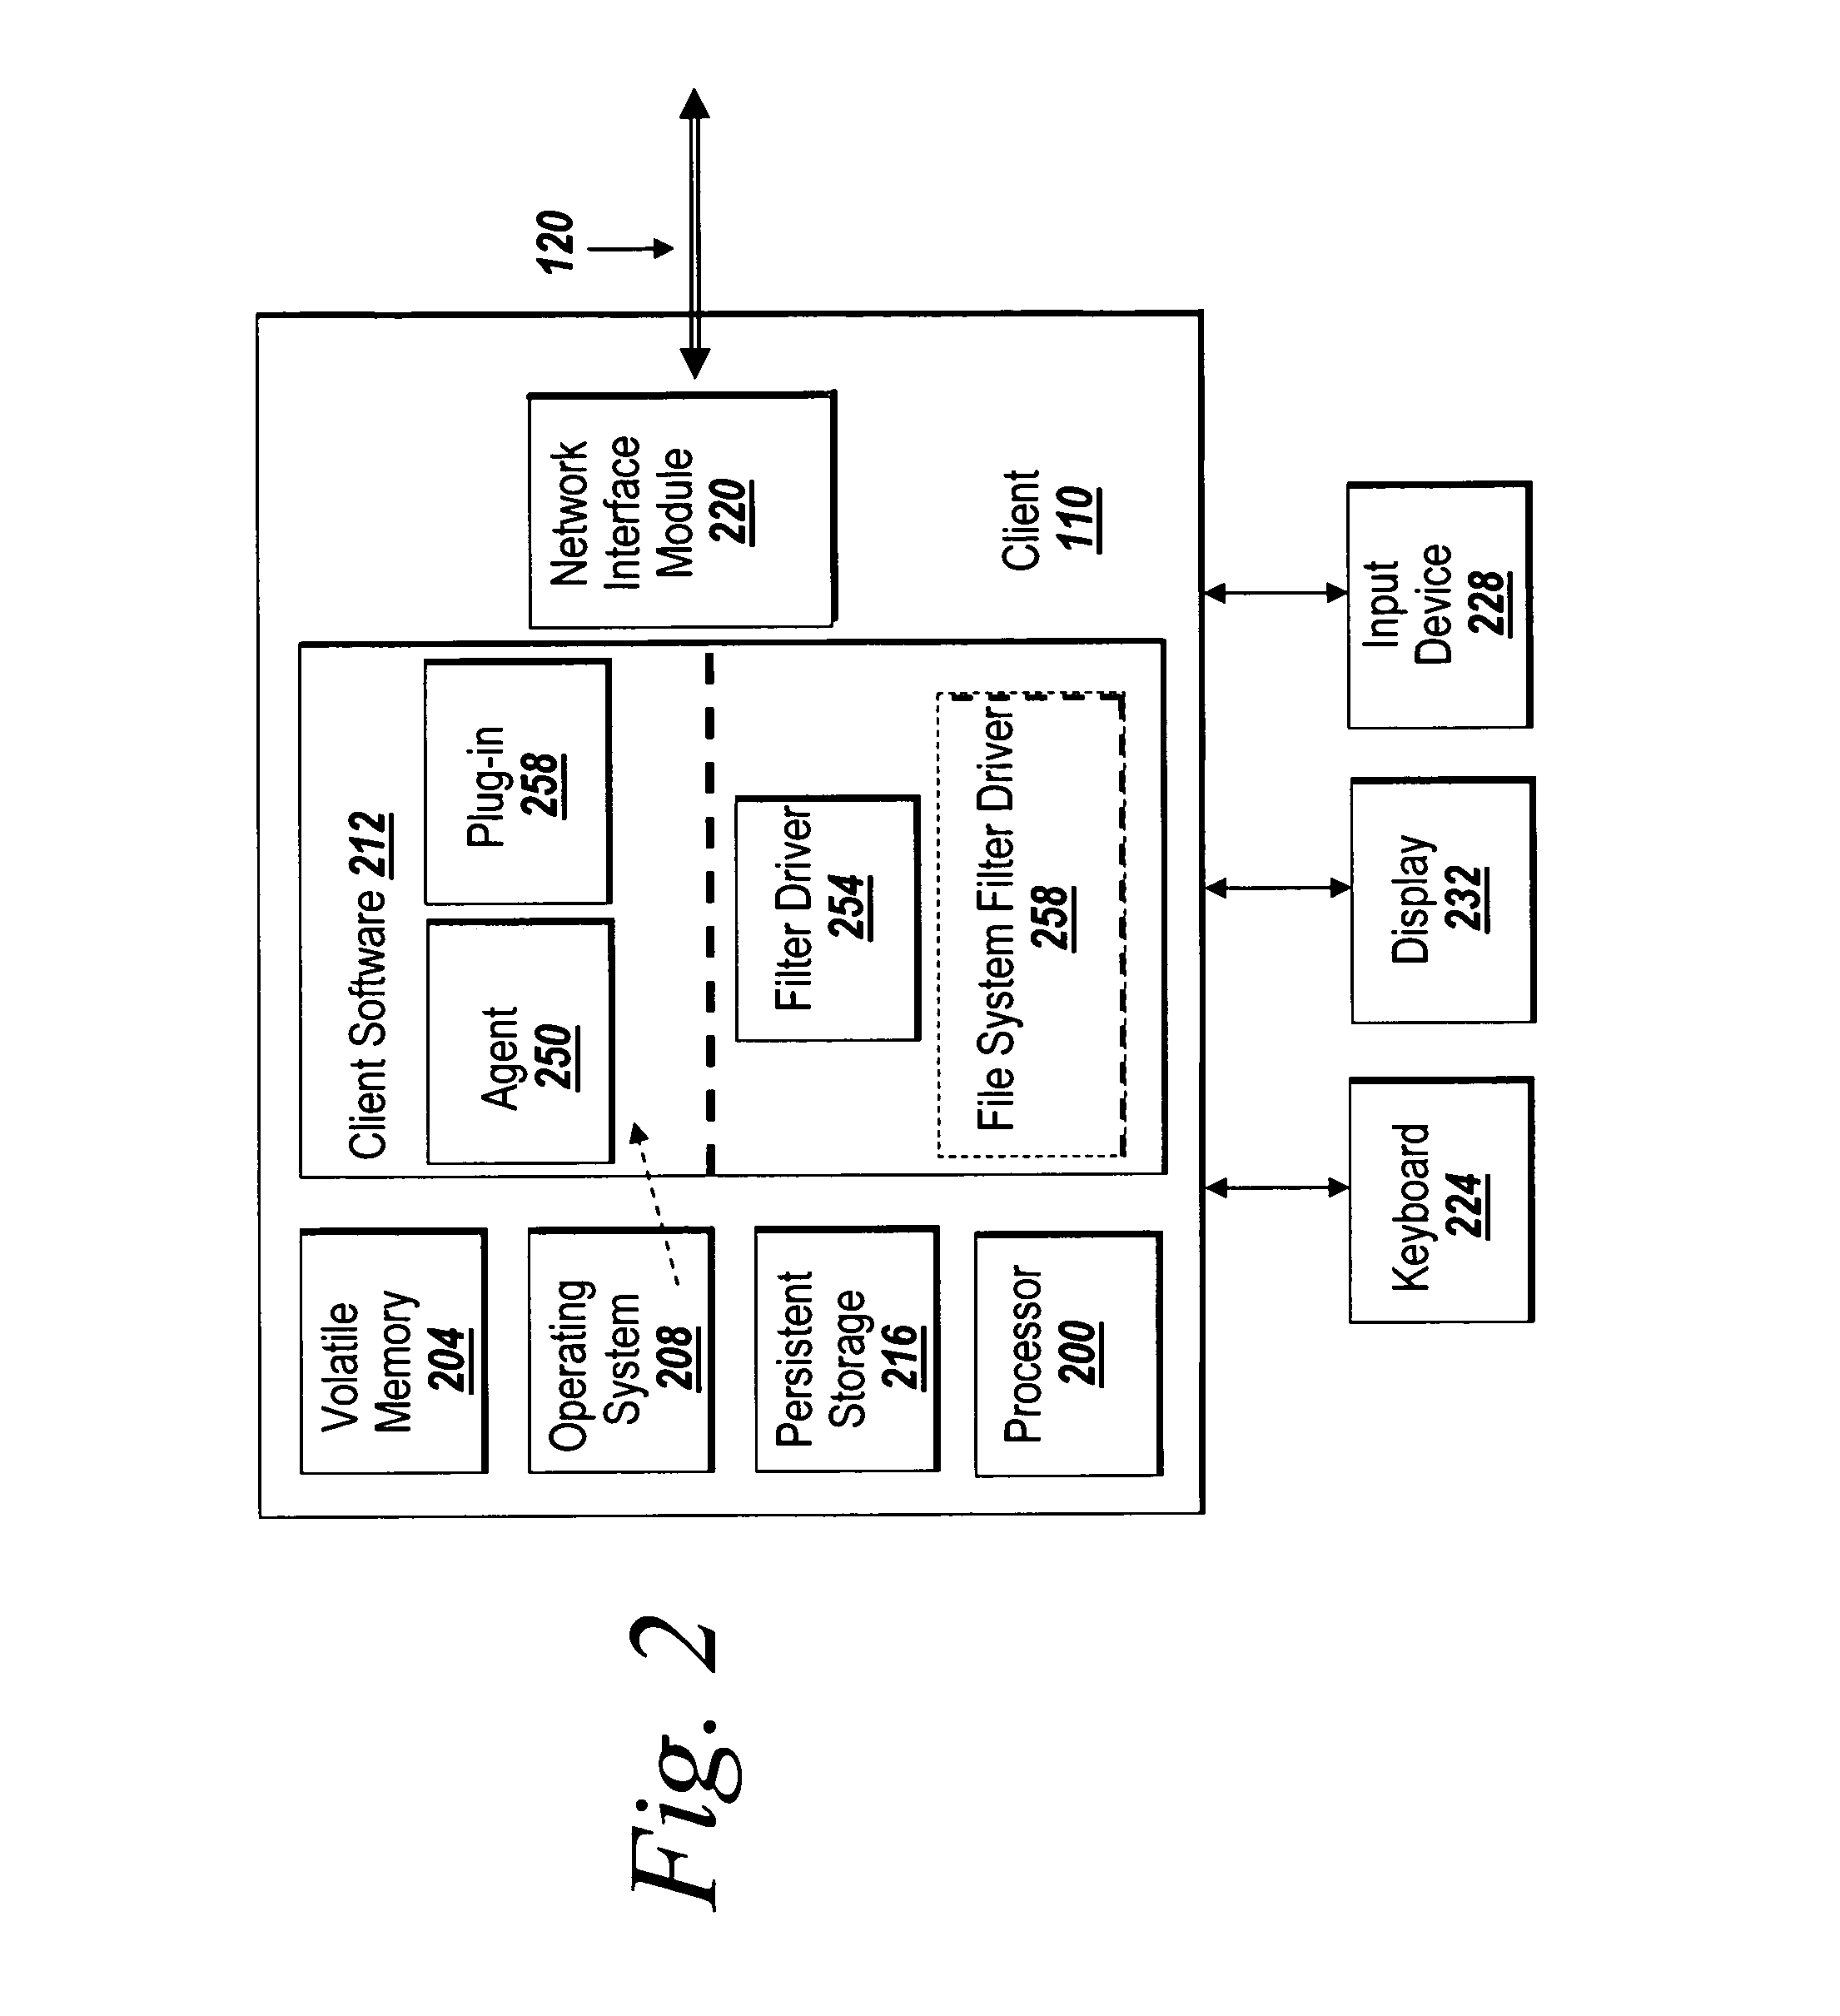 Systems and methods for storing meta-data separate from a digital asset